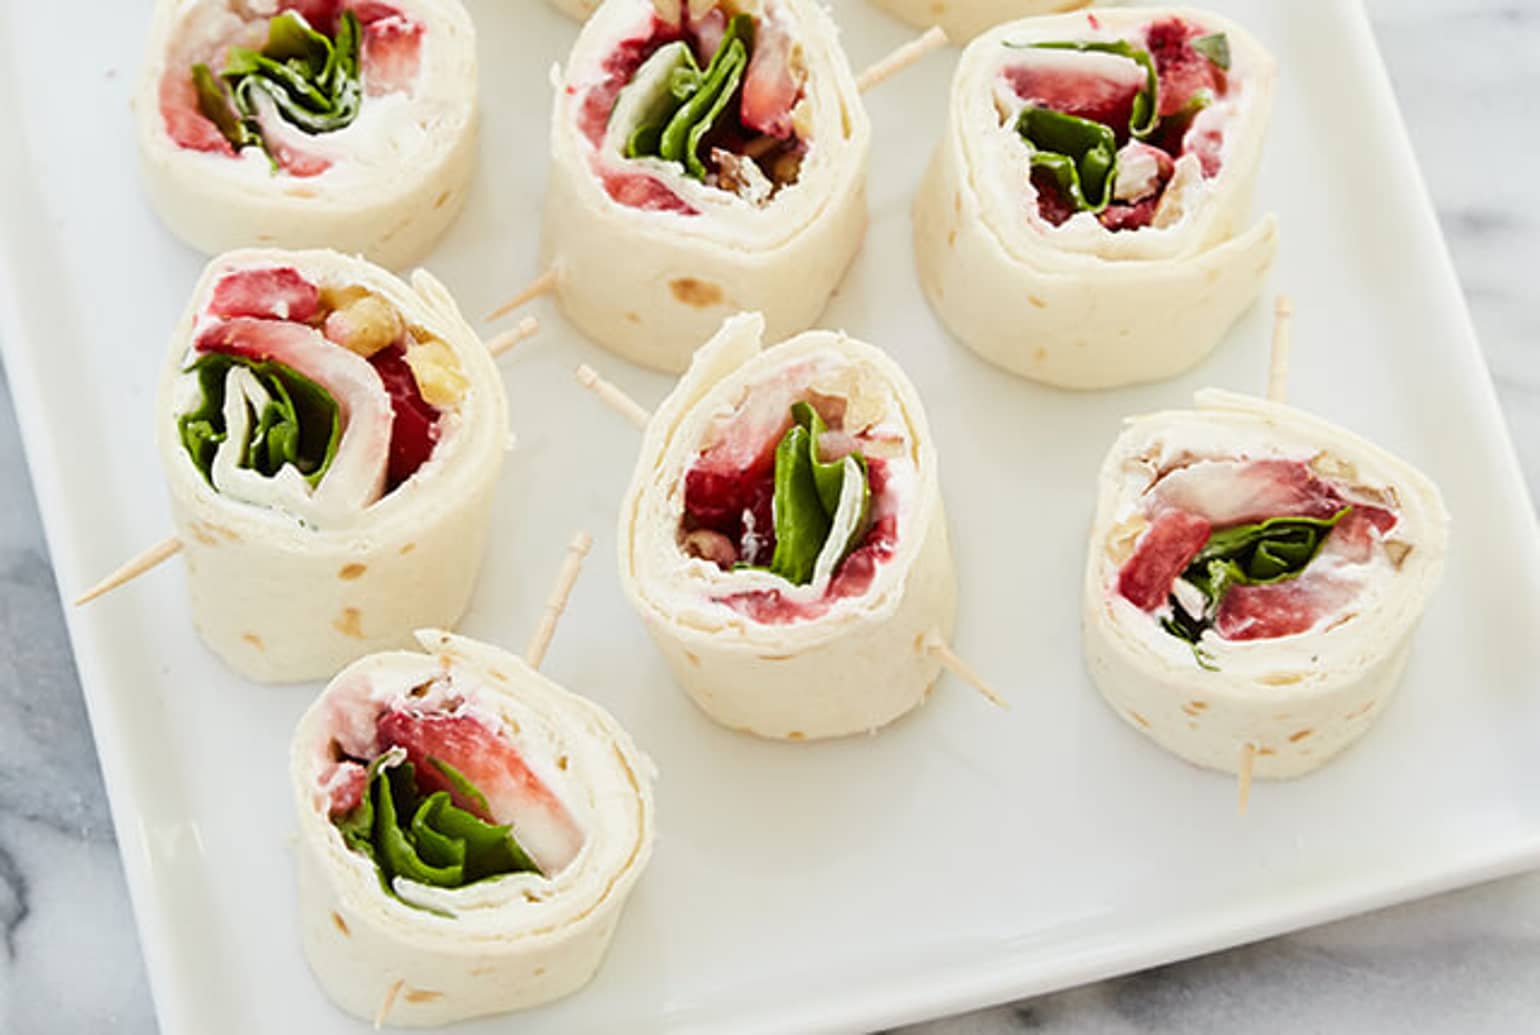 Spinach and Strawberry Roll-Ups